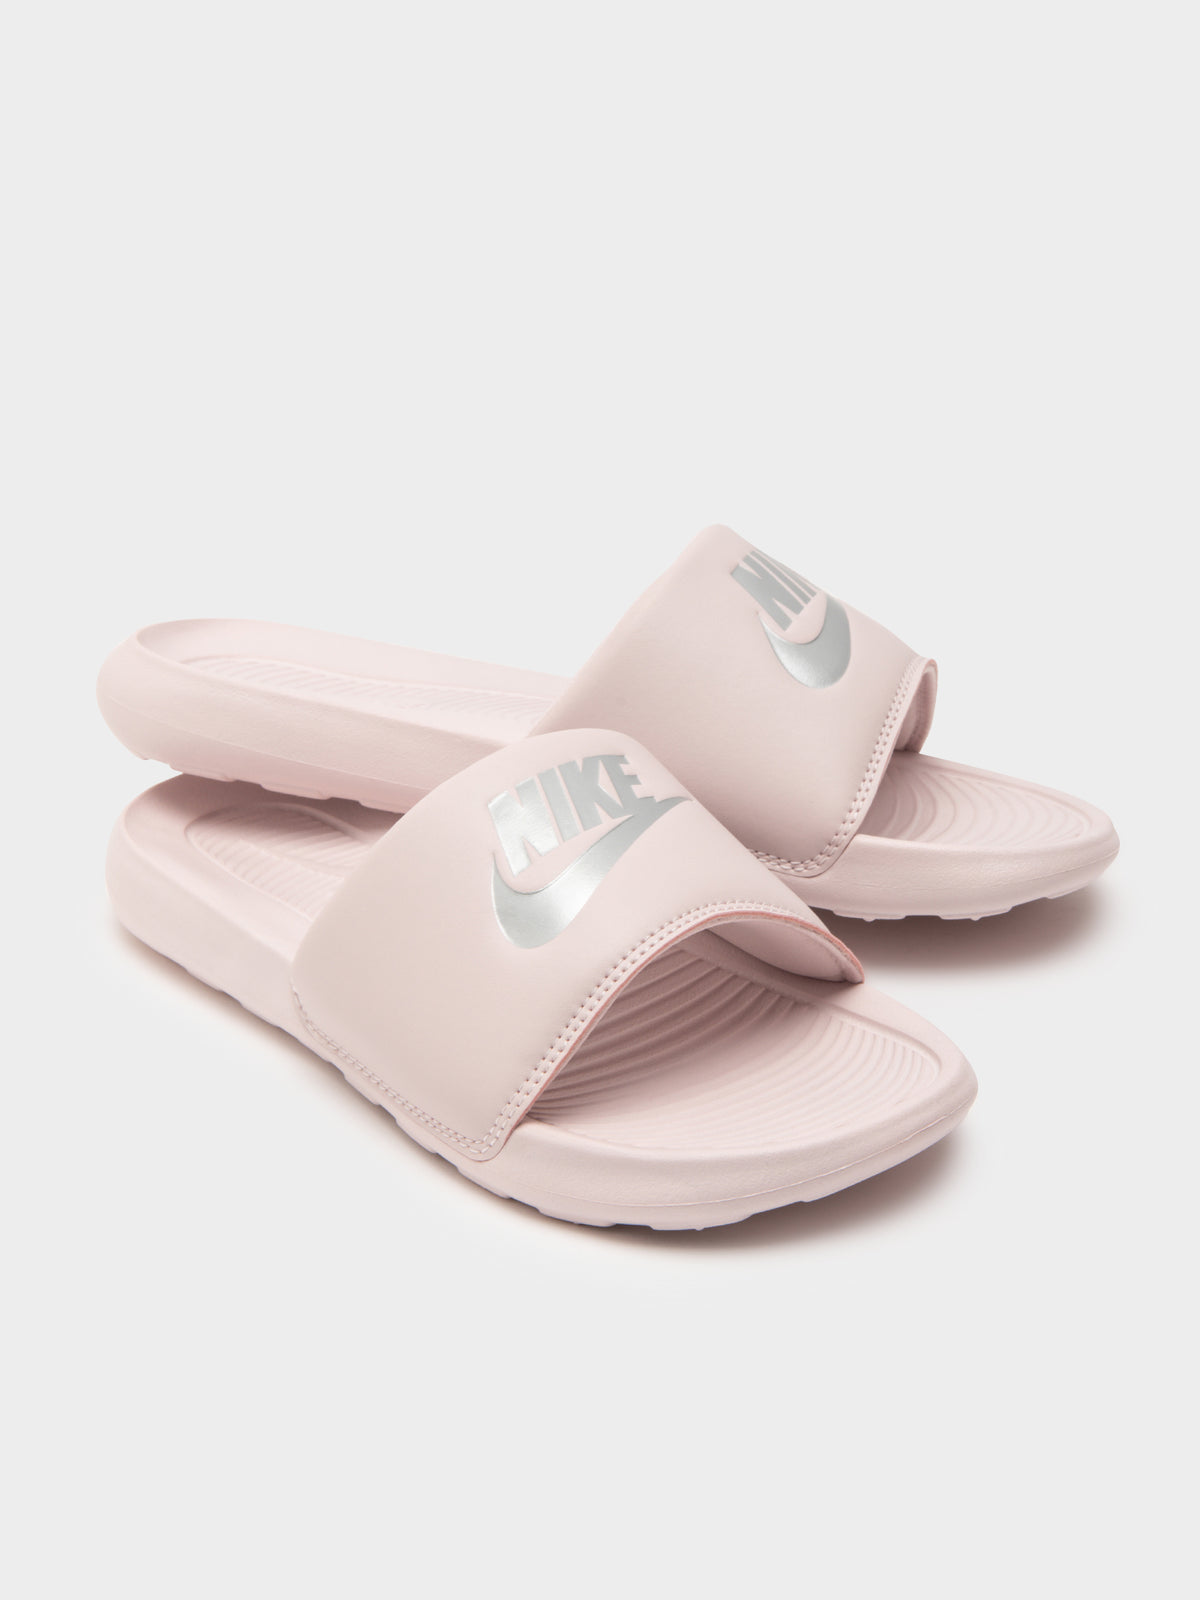 Womens Victori One Slides in Barely Rose Pink &amp; Metallic Silver